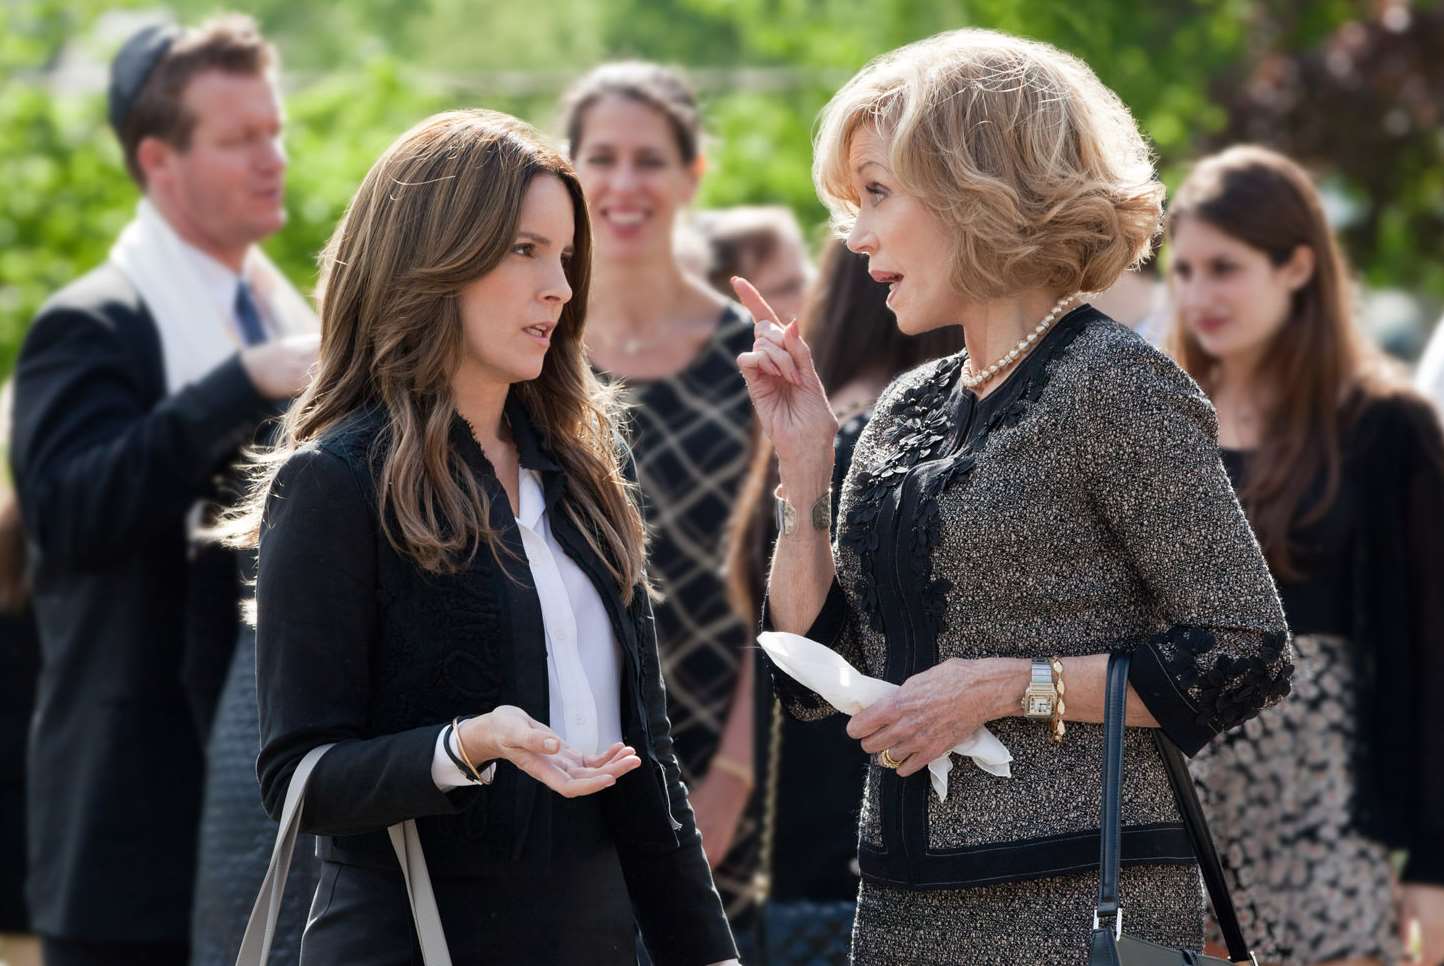 This Is Where I Leave You, with Tina Fey as Wendy Altman and Jane Fonda as Hilary Altman. Picture: PA Photo/Warner Brothers